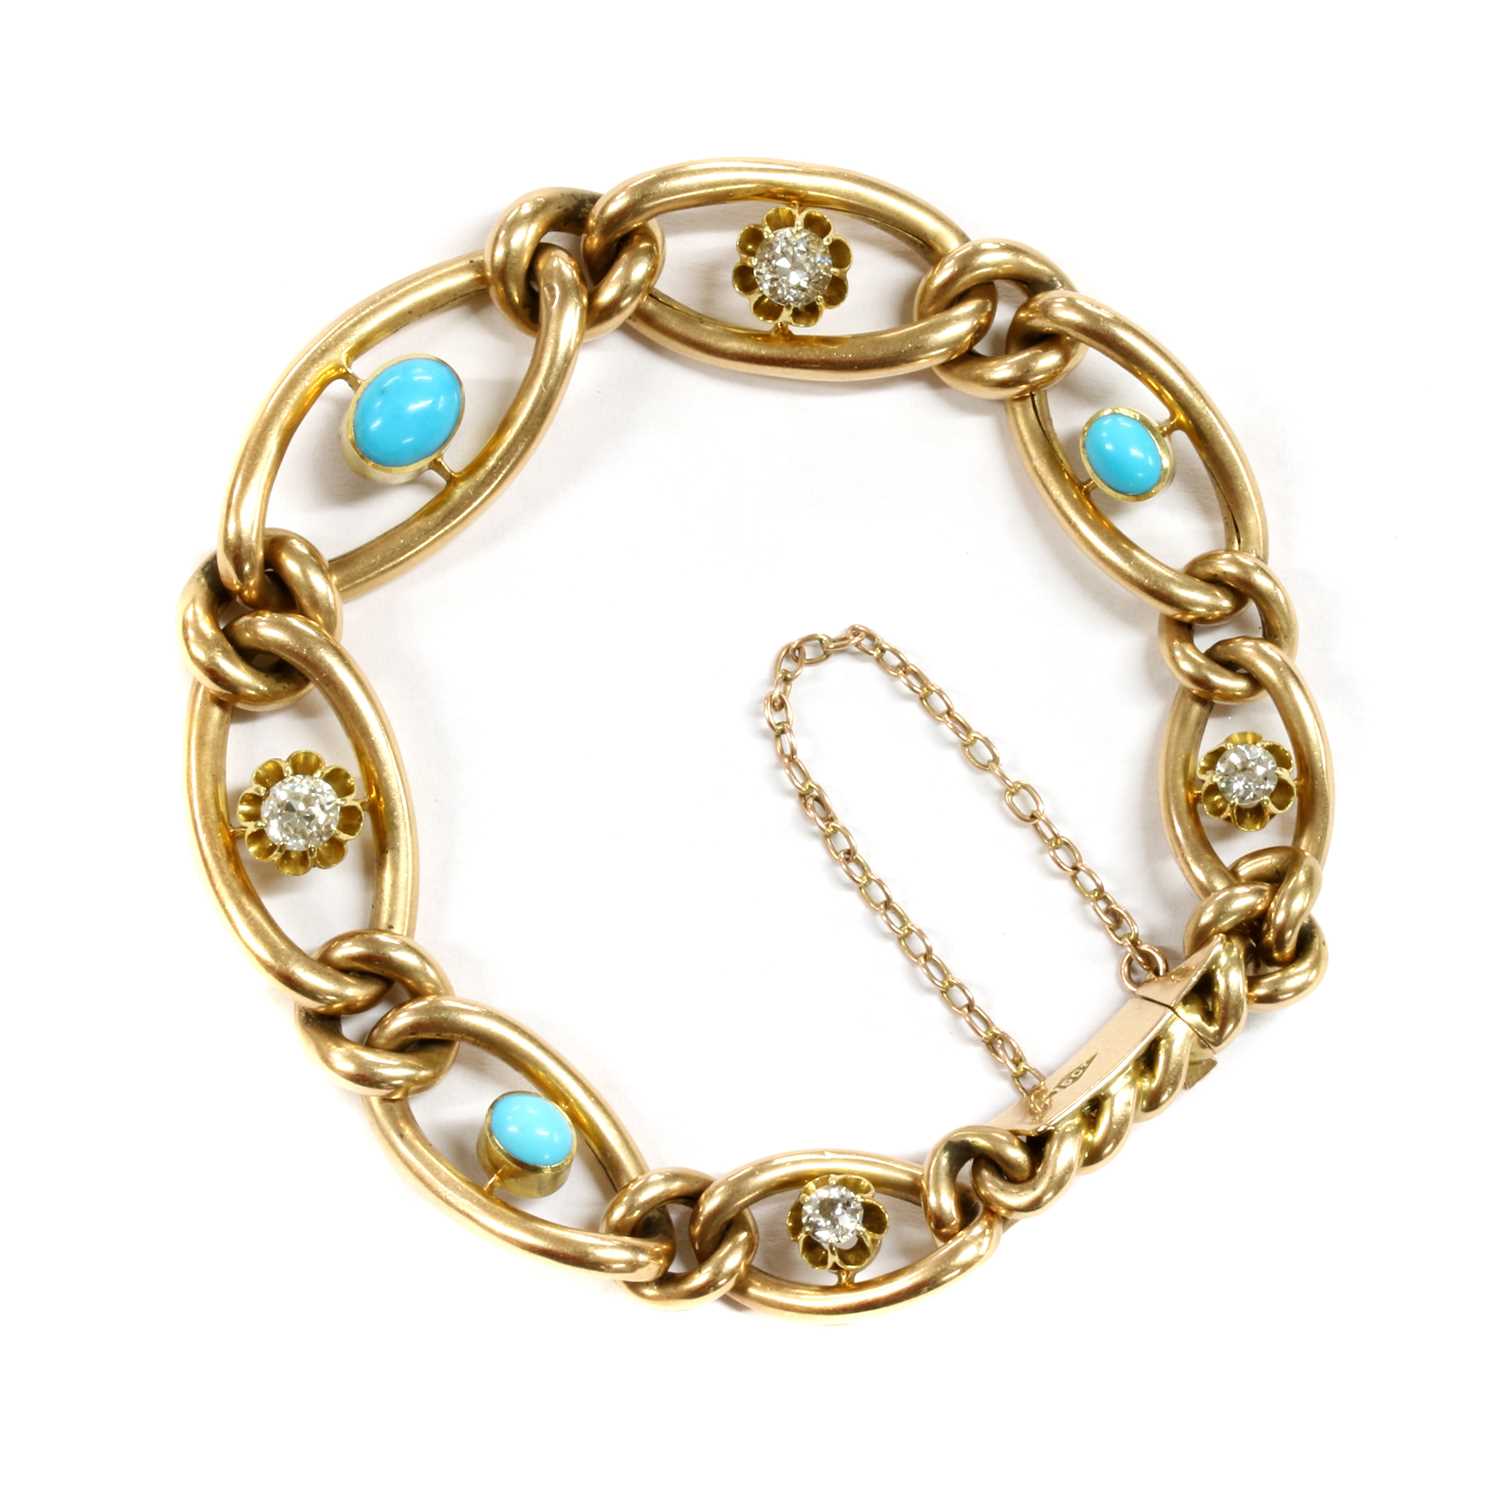 Lot 2 - A Victorian gold turquoise and diamond graduated curb bracelet